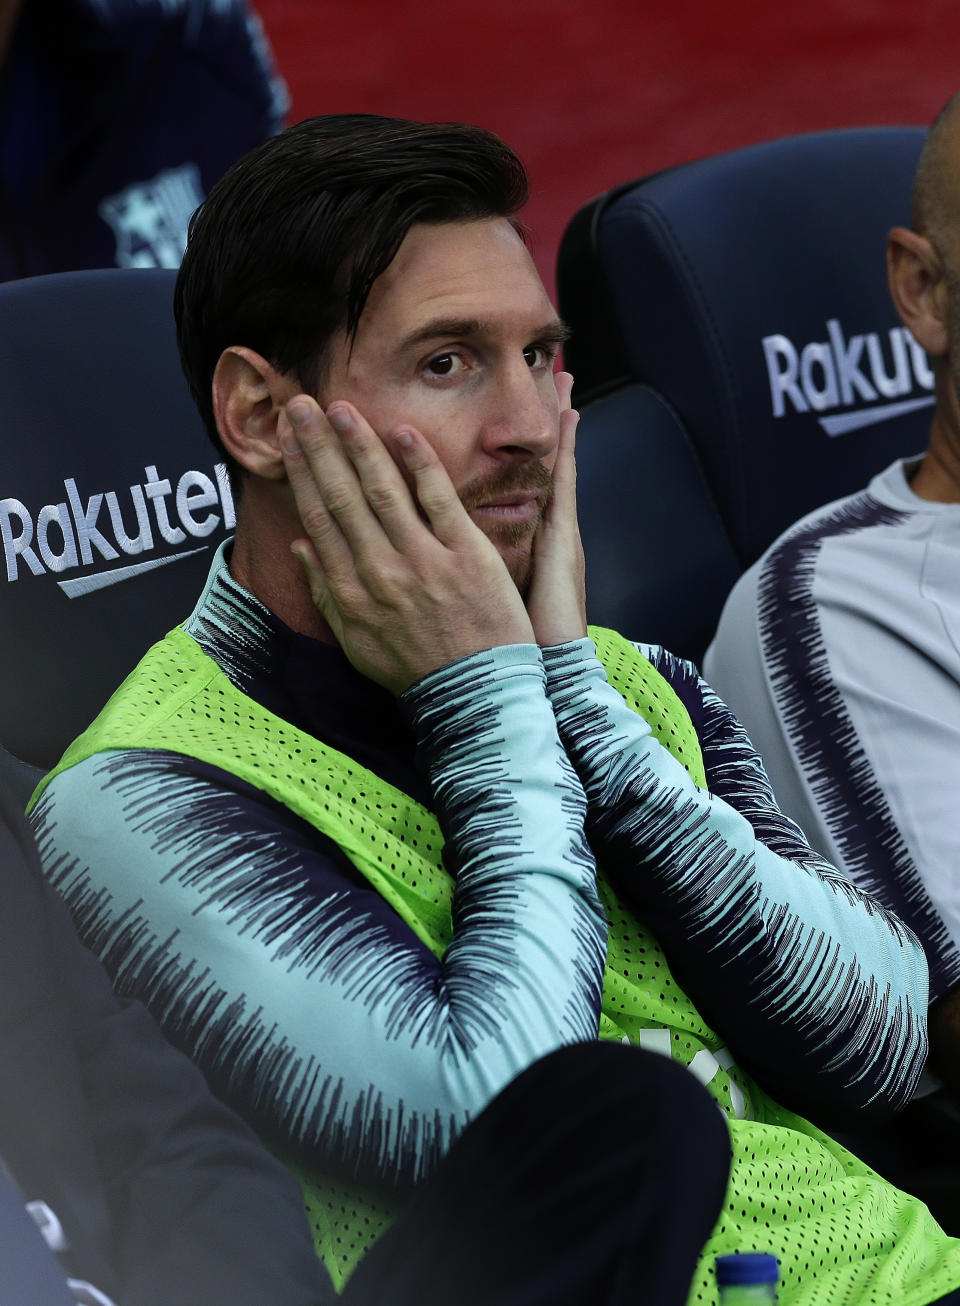 FC Barcelona's Lionel Messi gestures as he sits on the bench prior to the Spanish La Liga soccer match between FC Barcelona and Athletic Bilbao at the Camp Nou stadium in Barcelona, Spain, Saturday, Sept. 29, 2018. (AP Photo/Manu Fernandez)